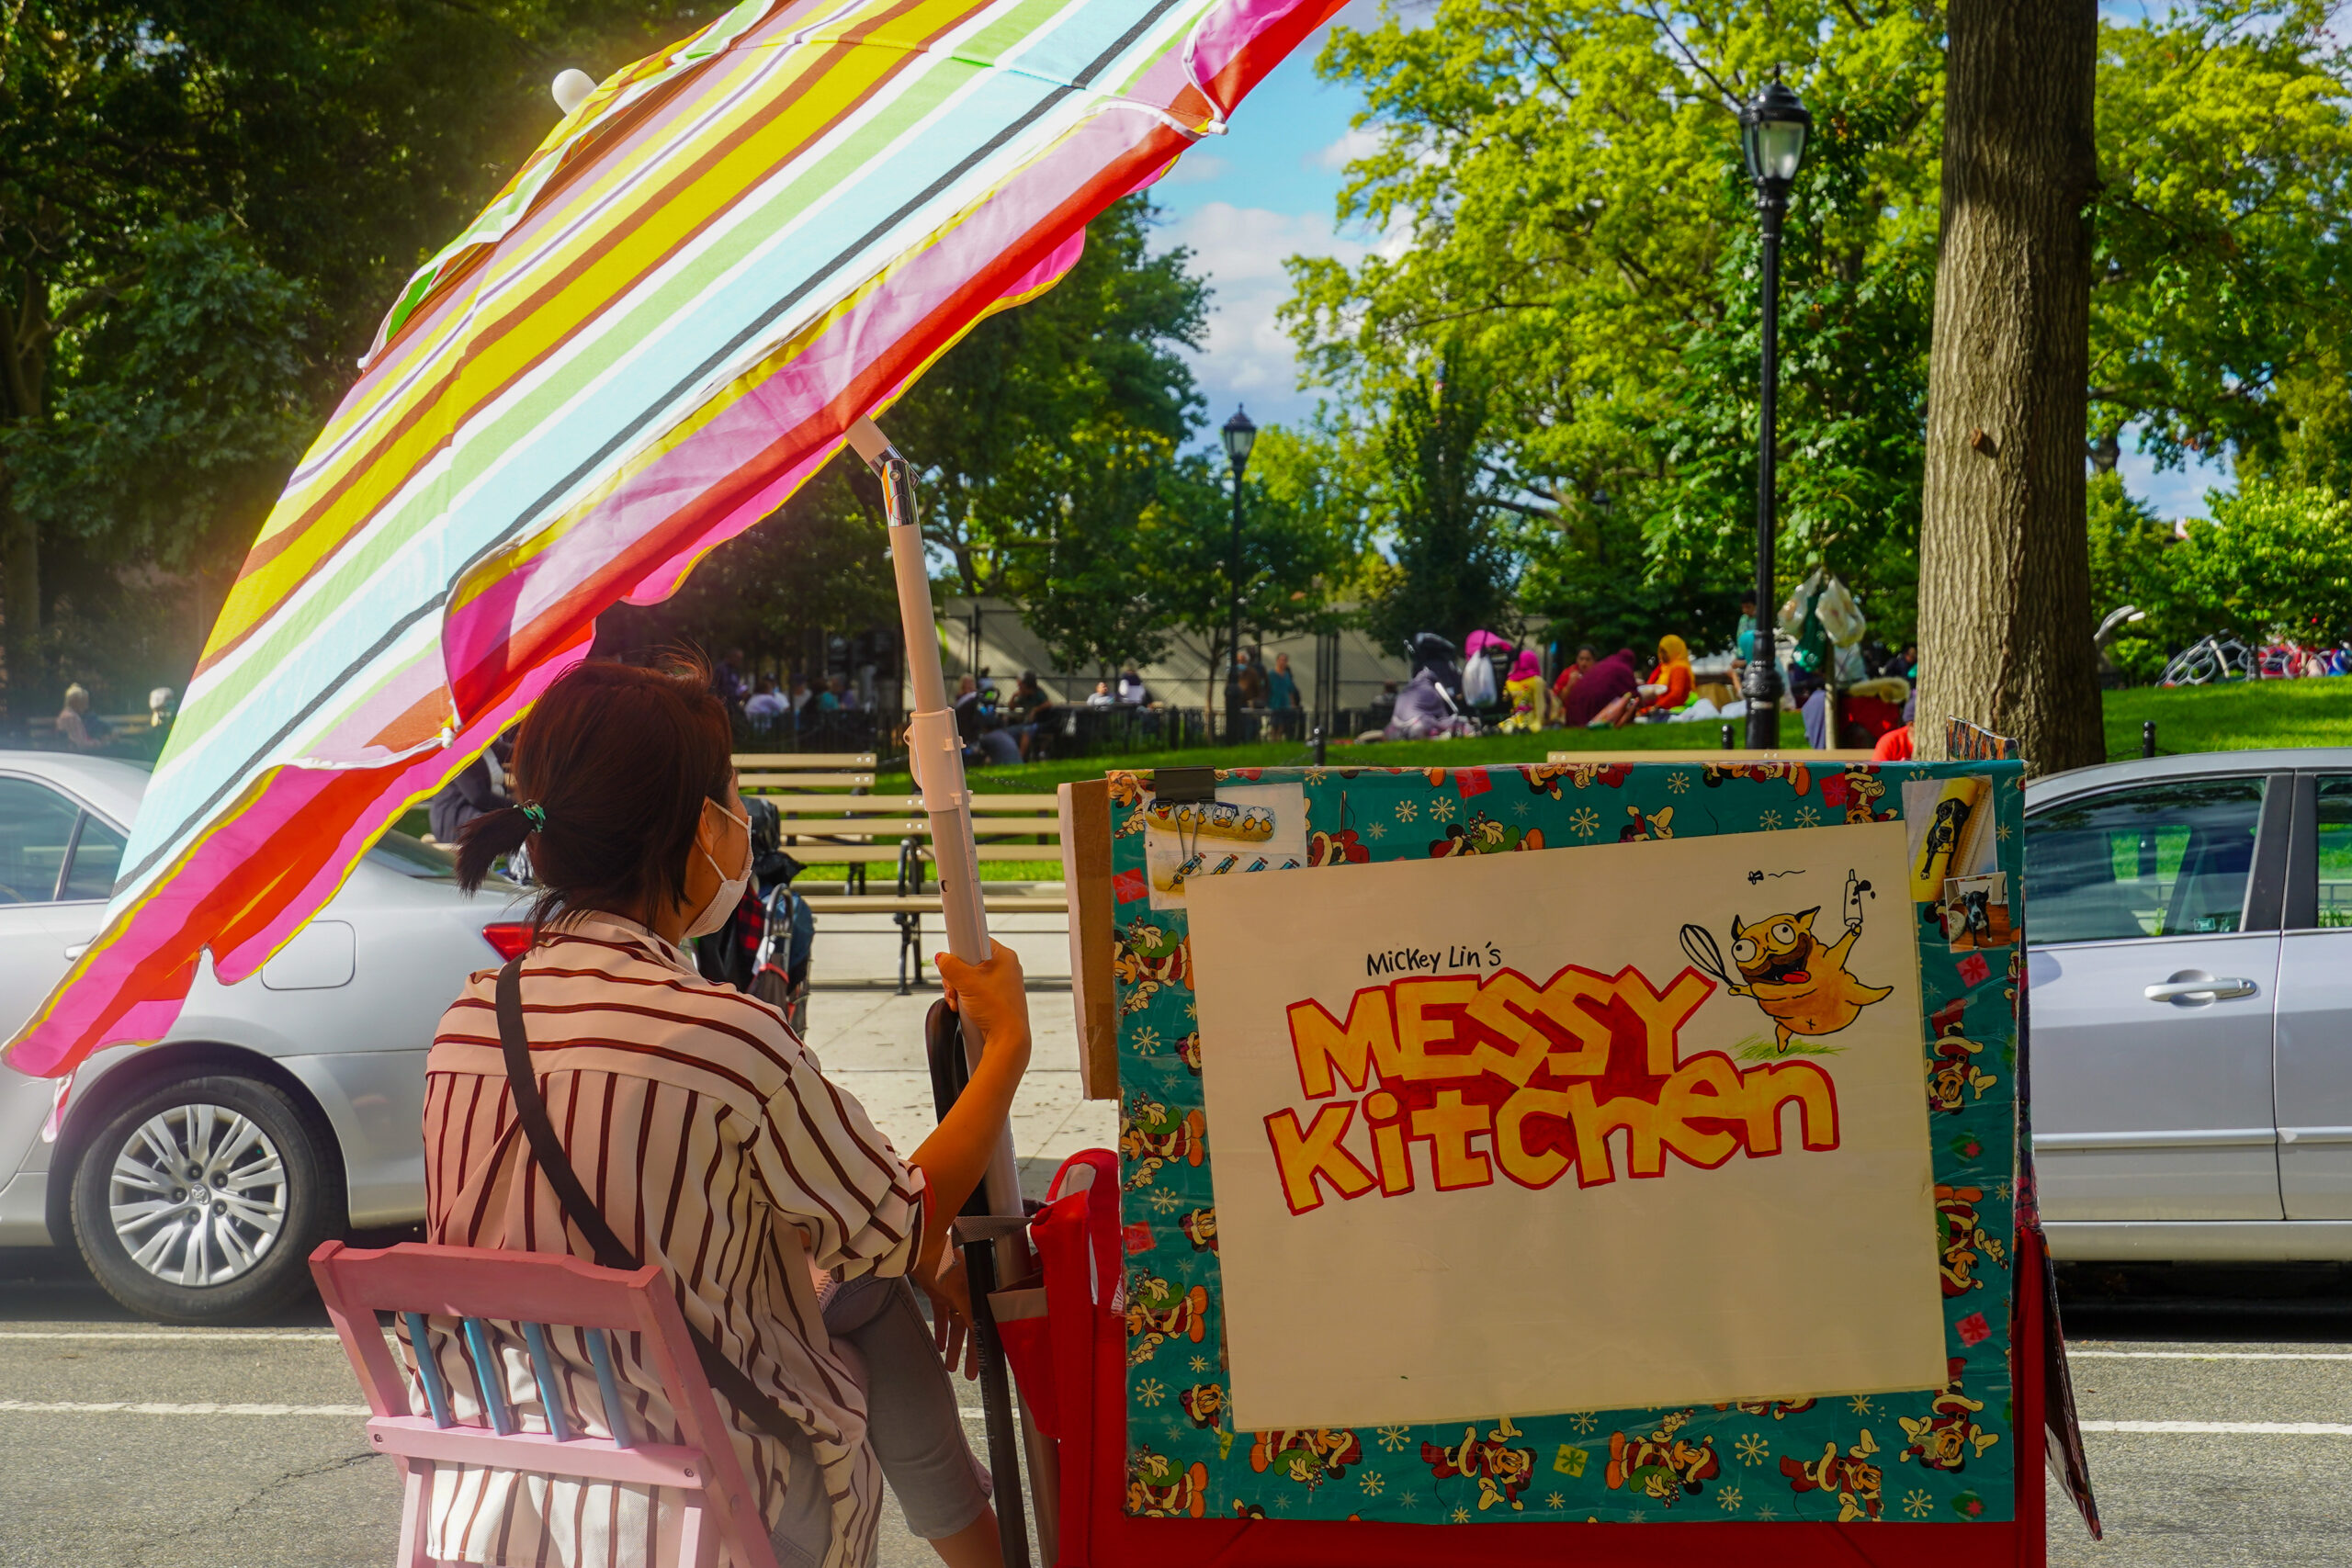 Mickey sits at her station in front of Travers Park. It's a sunny day, and she sits beneath her umbrella. The "Mickey Lin's Messy Kitchen" logo is visible on back of the wagon. In the background, people in Travers Park are playing in the handball court, and others are sitting on the grass and having a picnic.